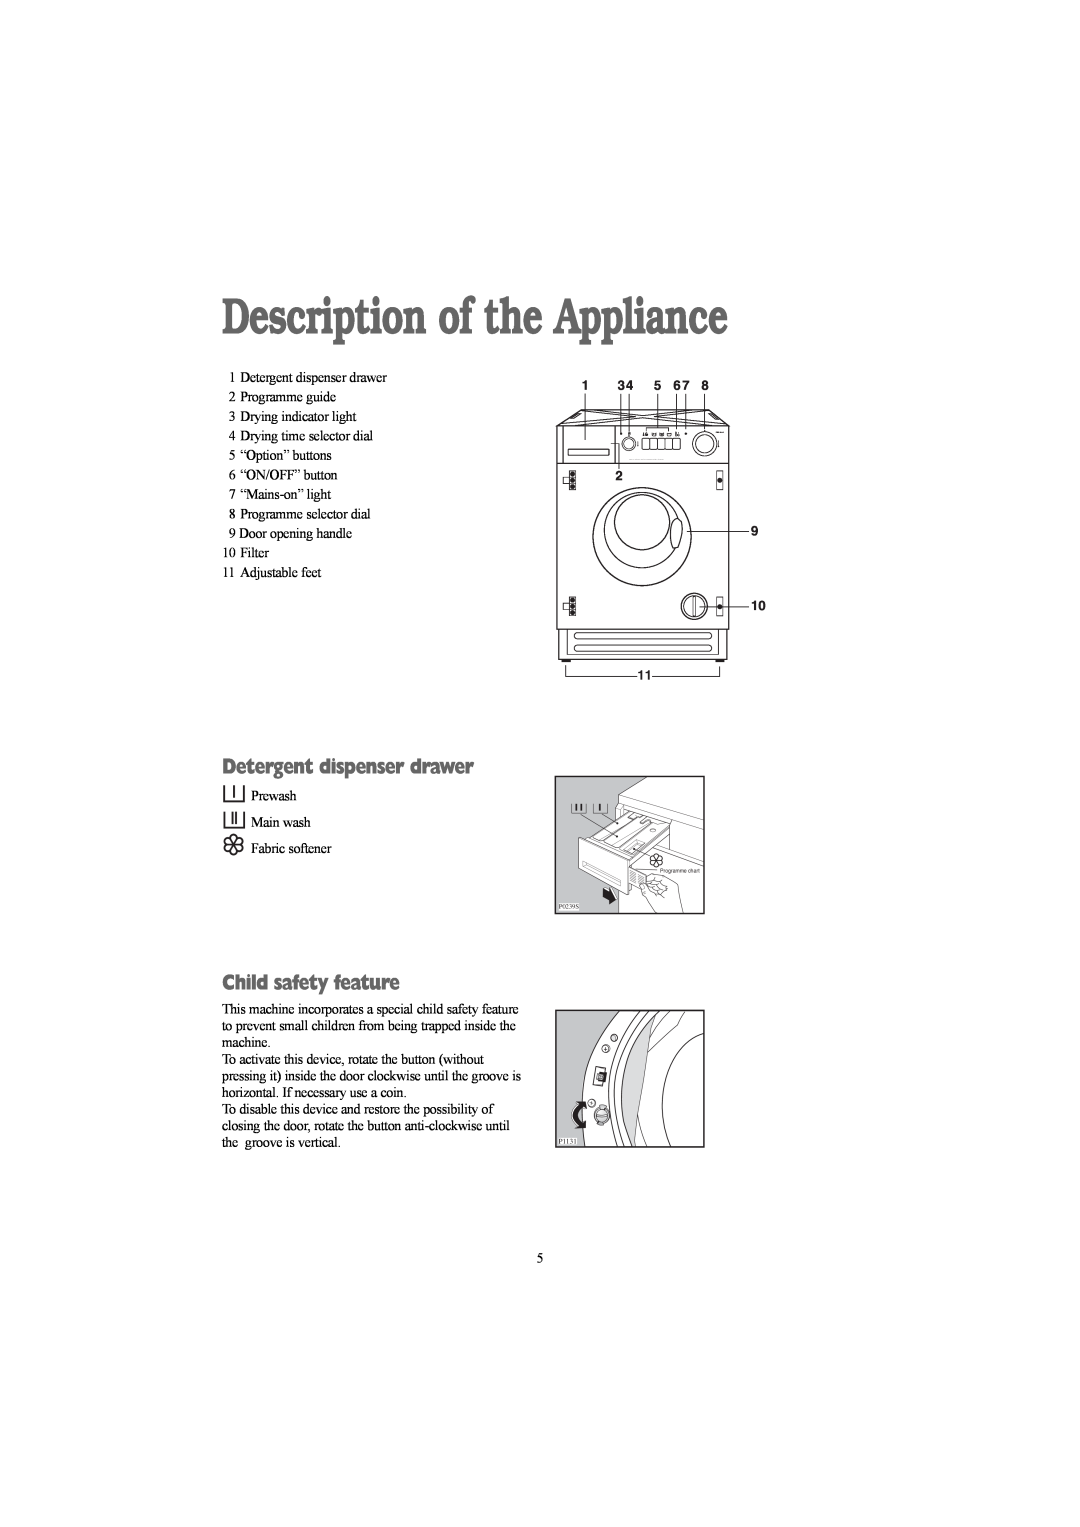 Electrolux EWD 1214 I manual Description of the Appliance, Detergent dispenser drawer, Child safety feature 